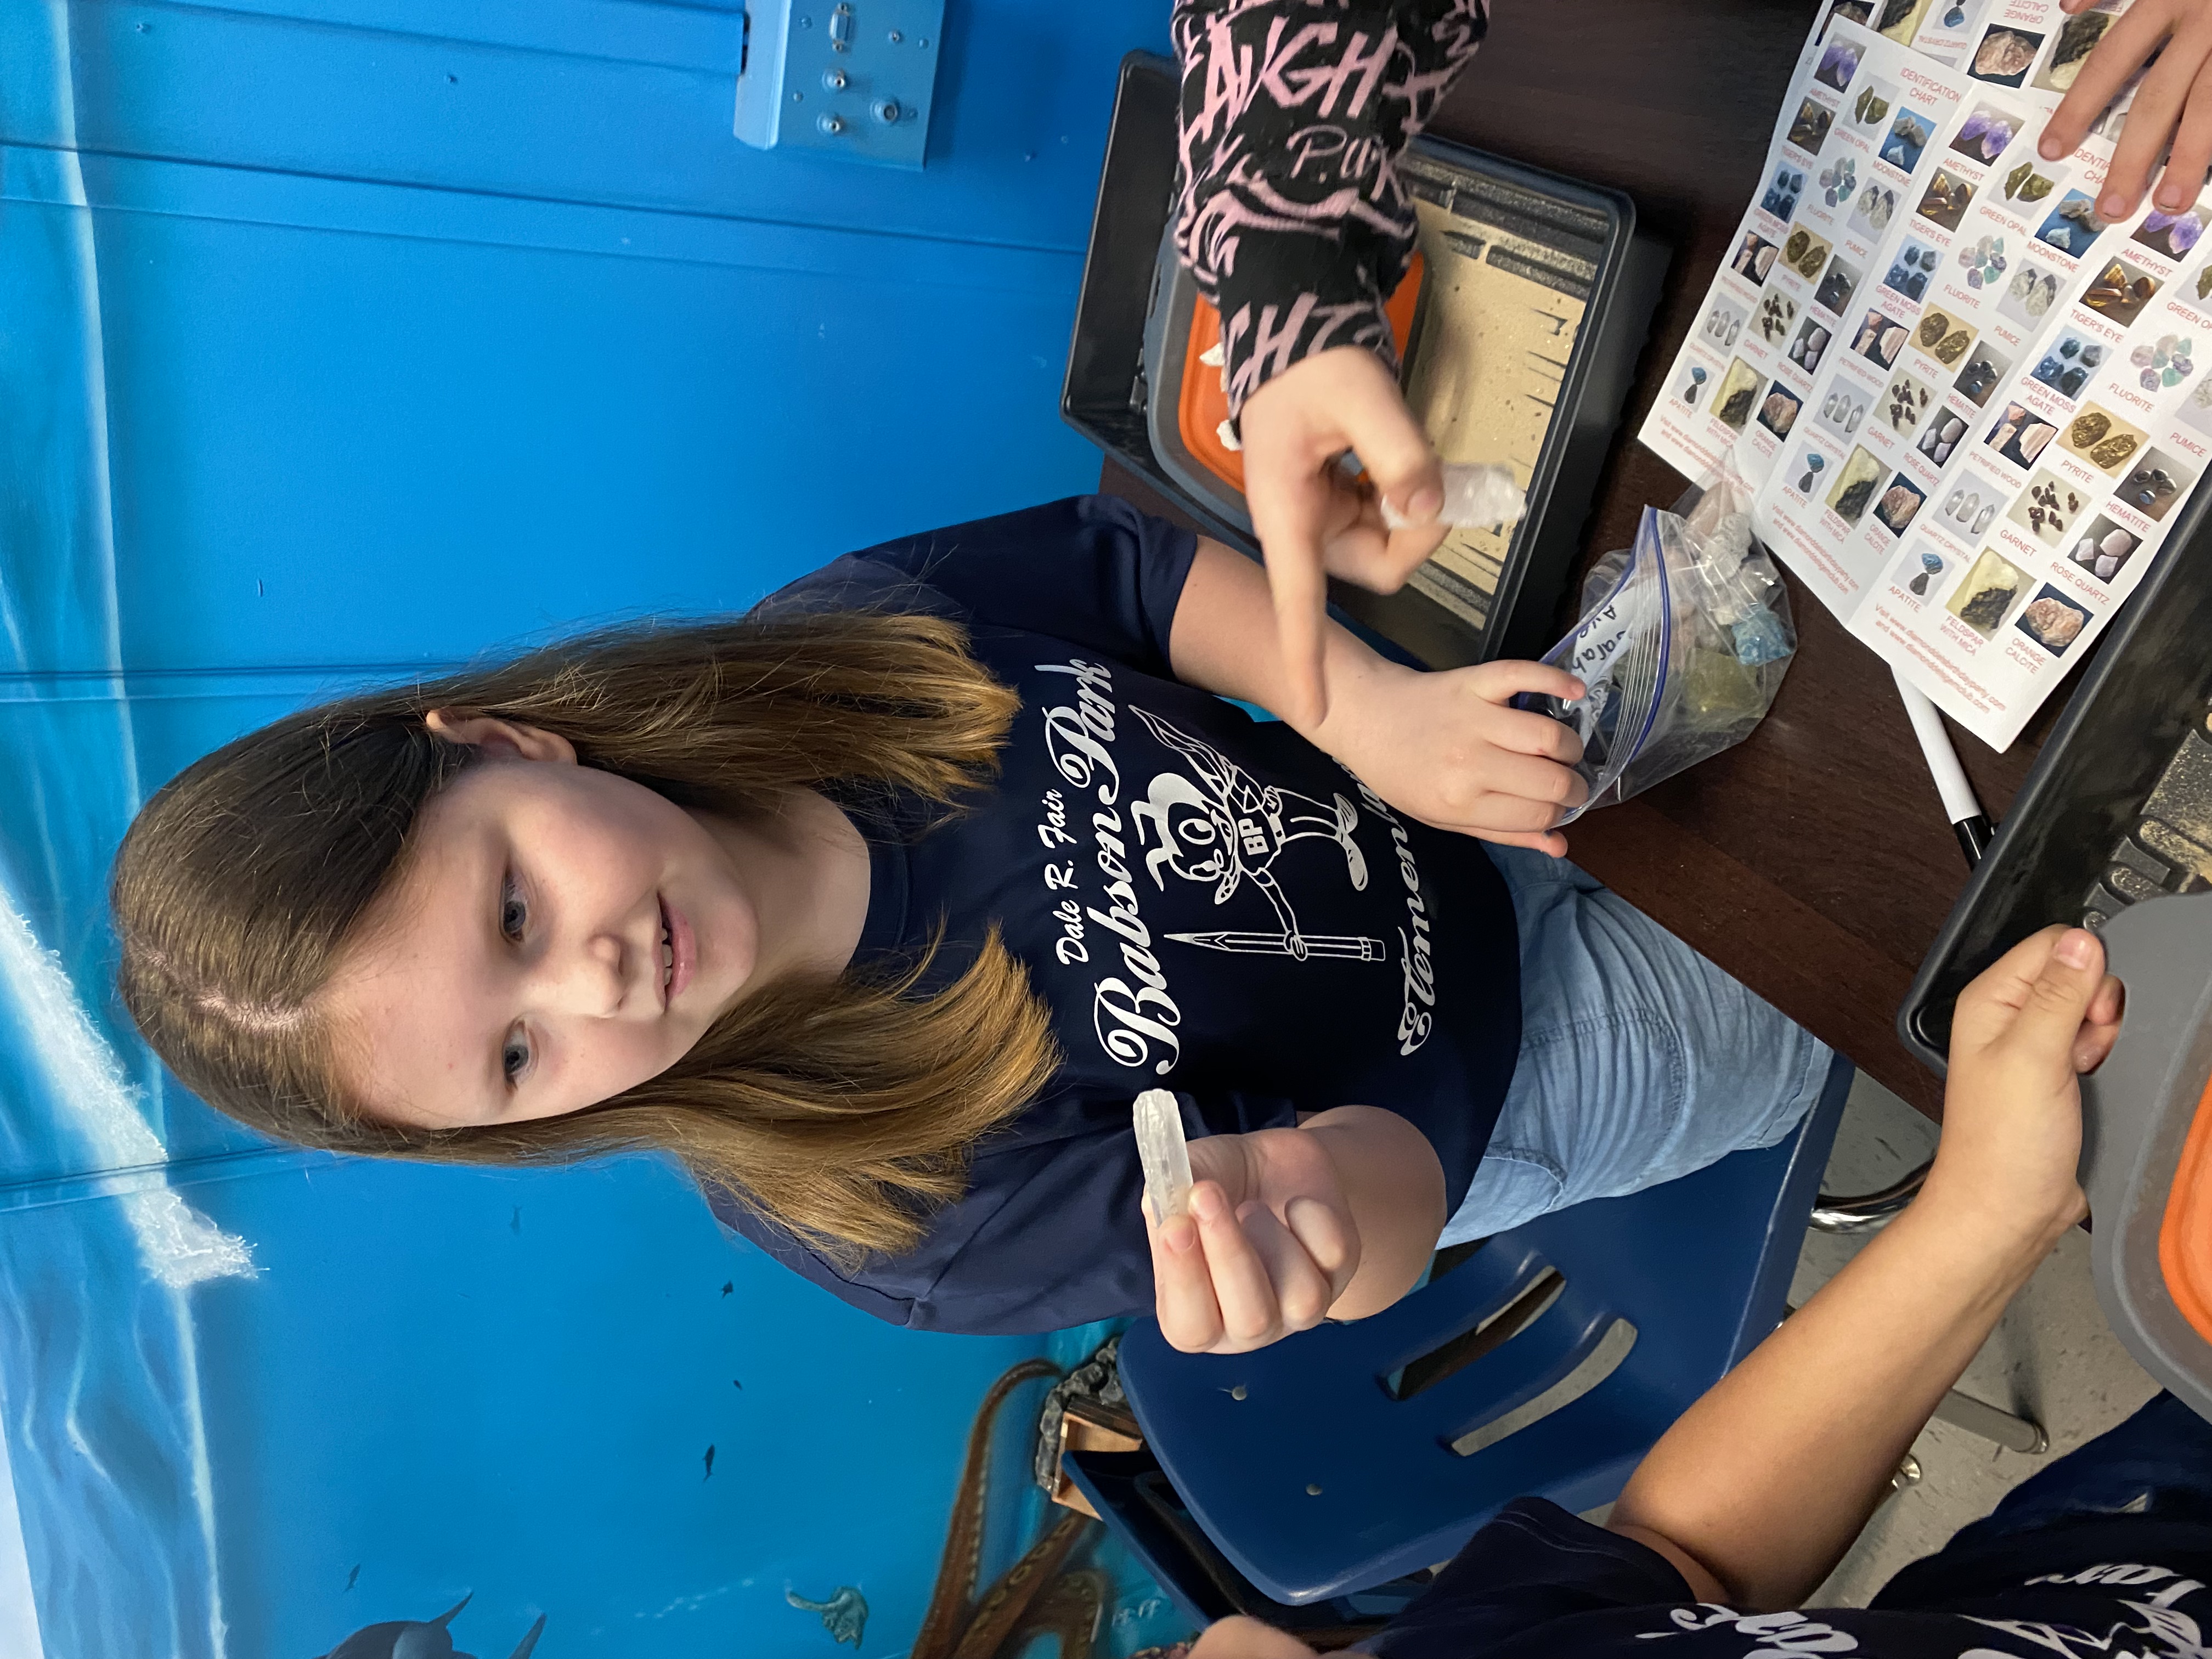 One of students excited to show off their findings from their mining for rocks and minerals.